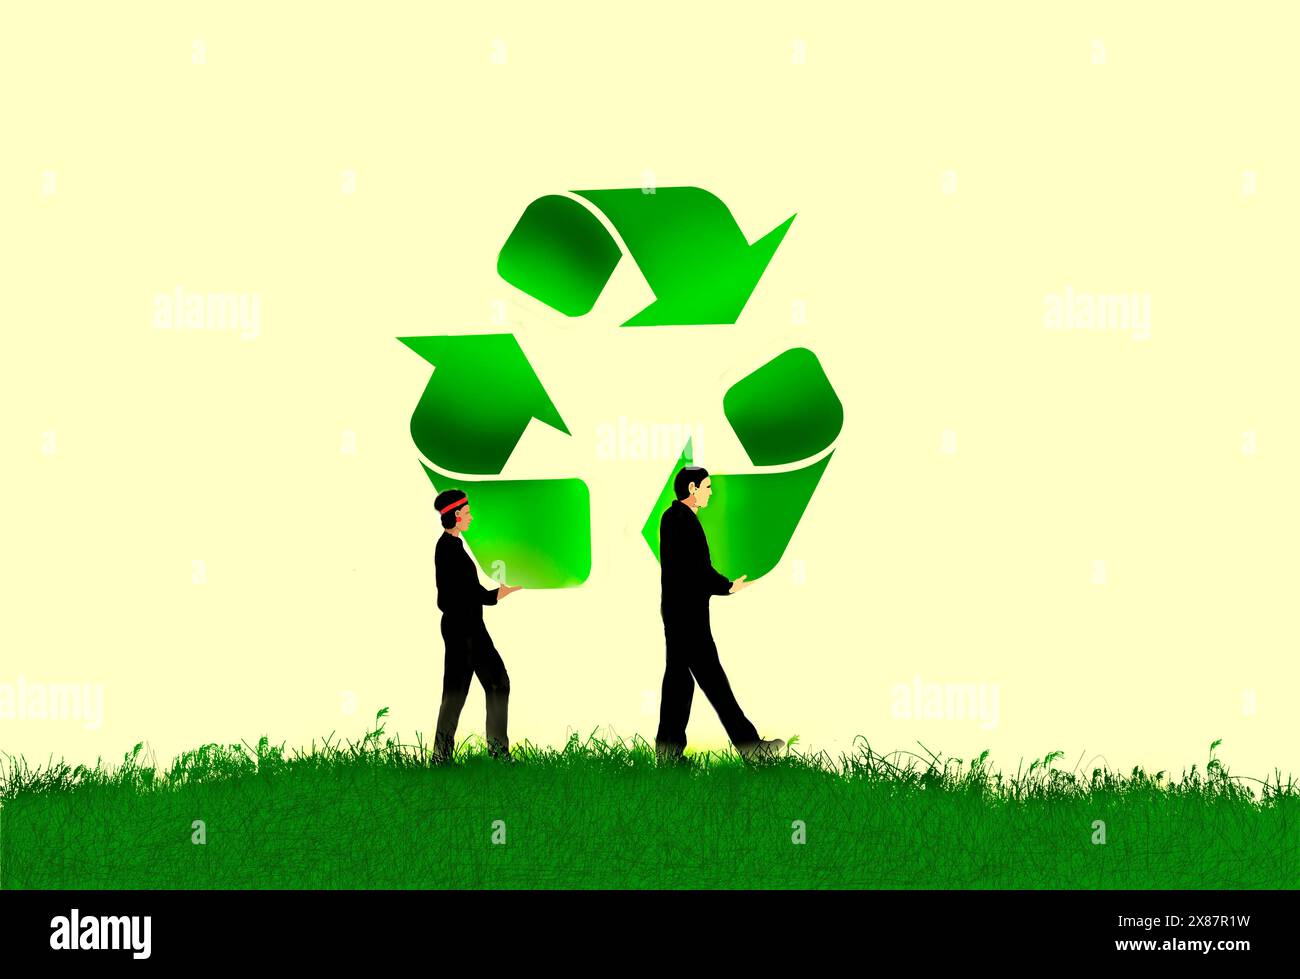 Man and woman carrying large recycling symbol Stock Photo